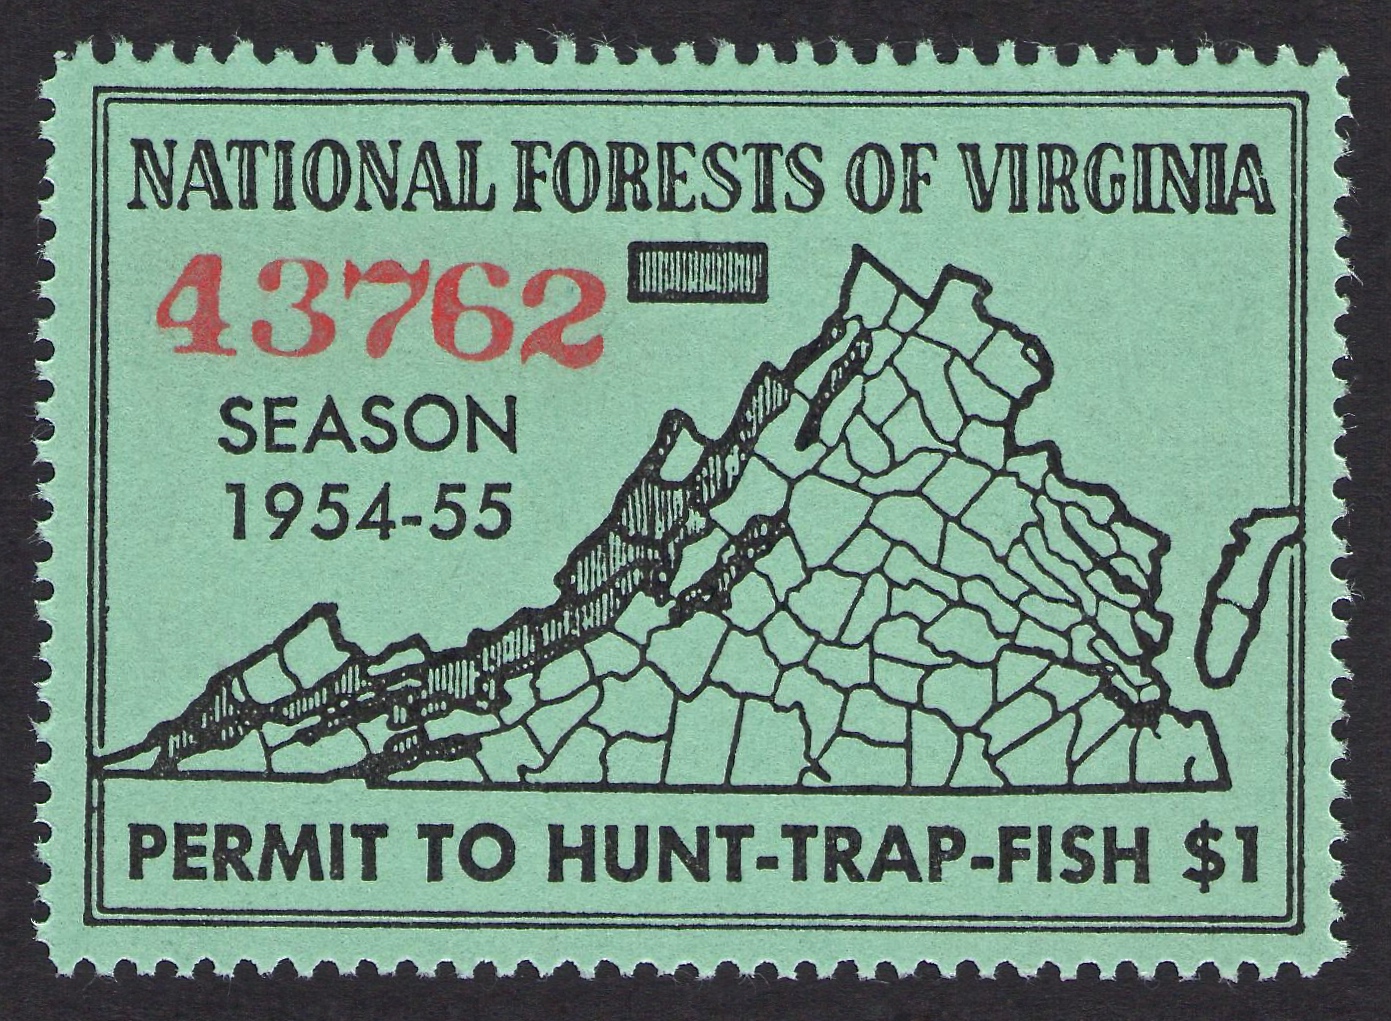 1954-55 National Forest Virginia